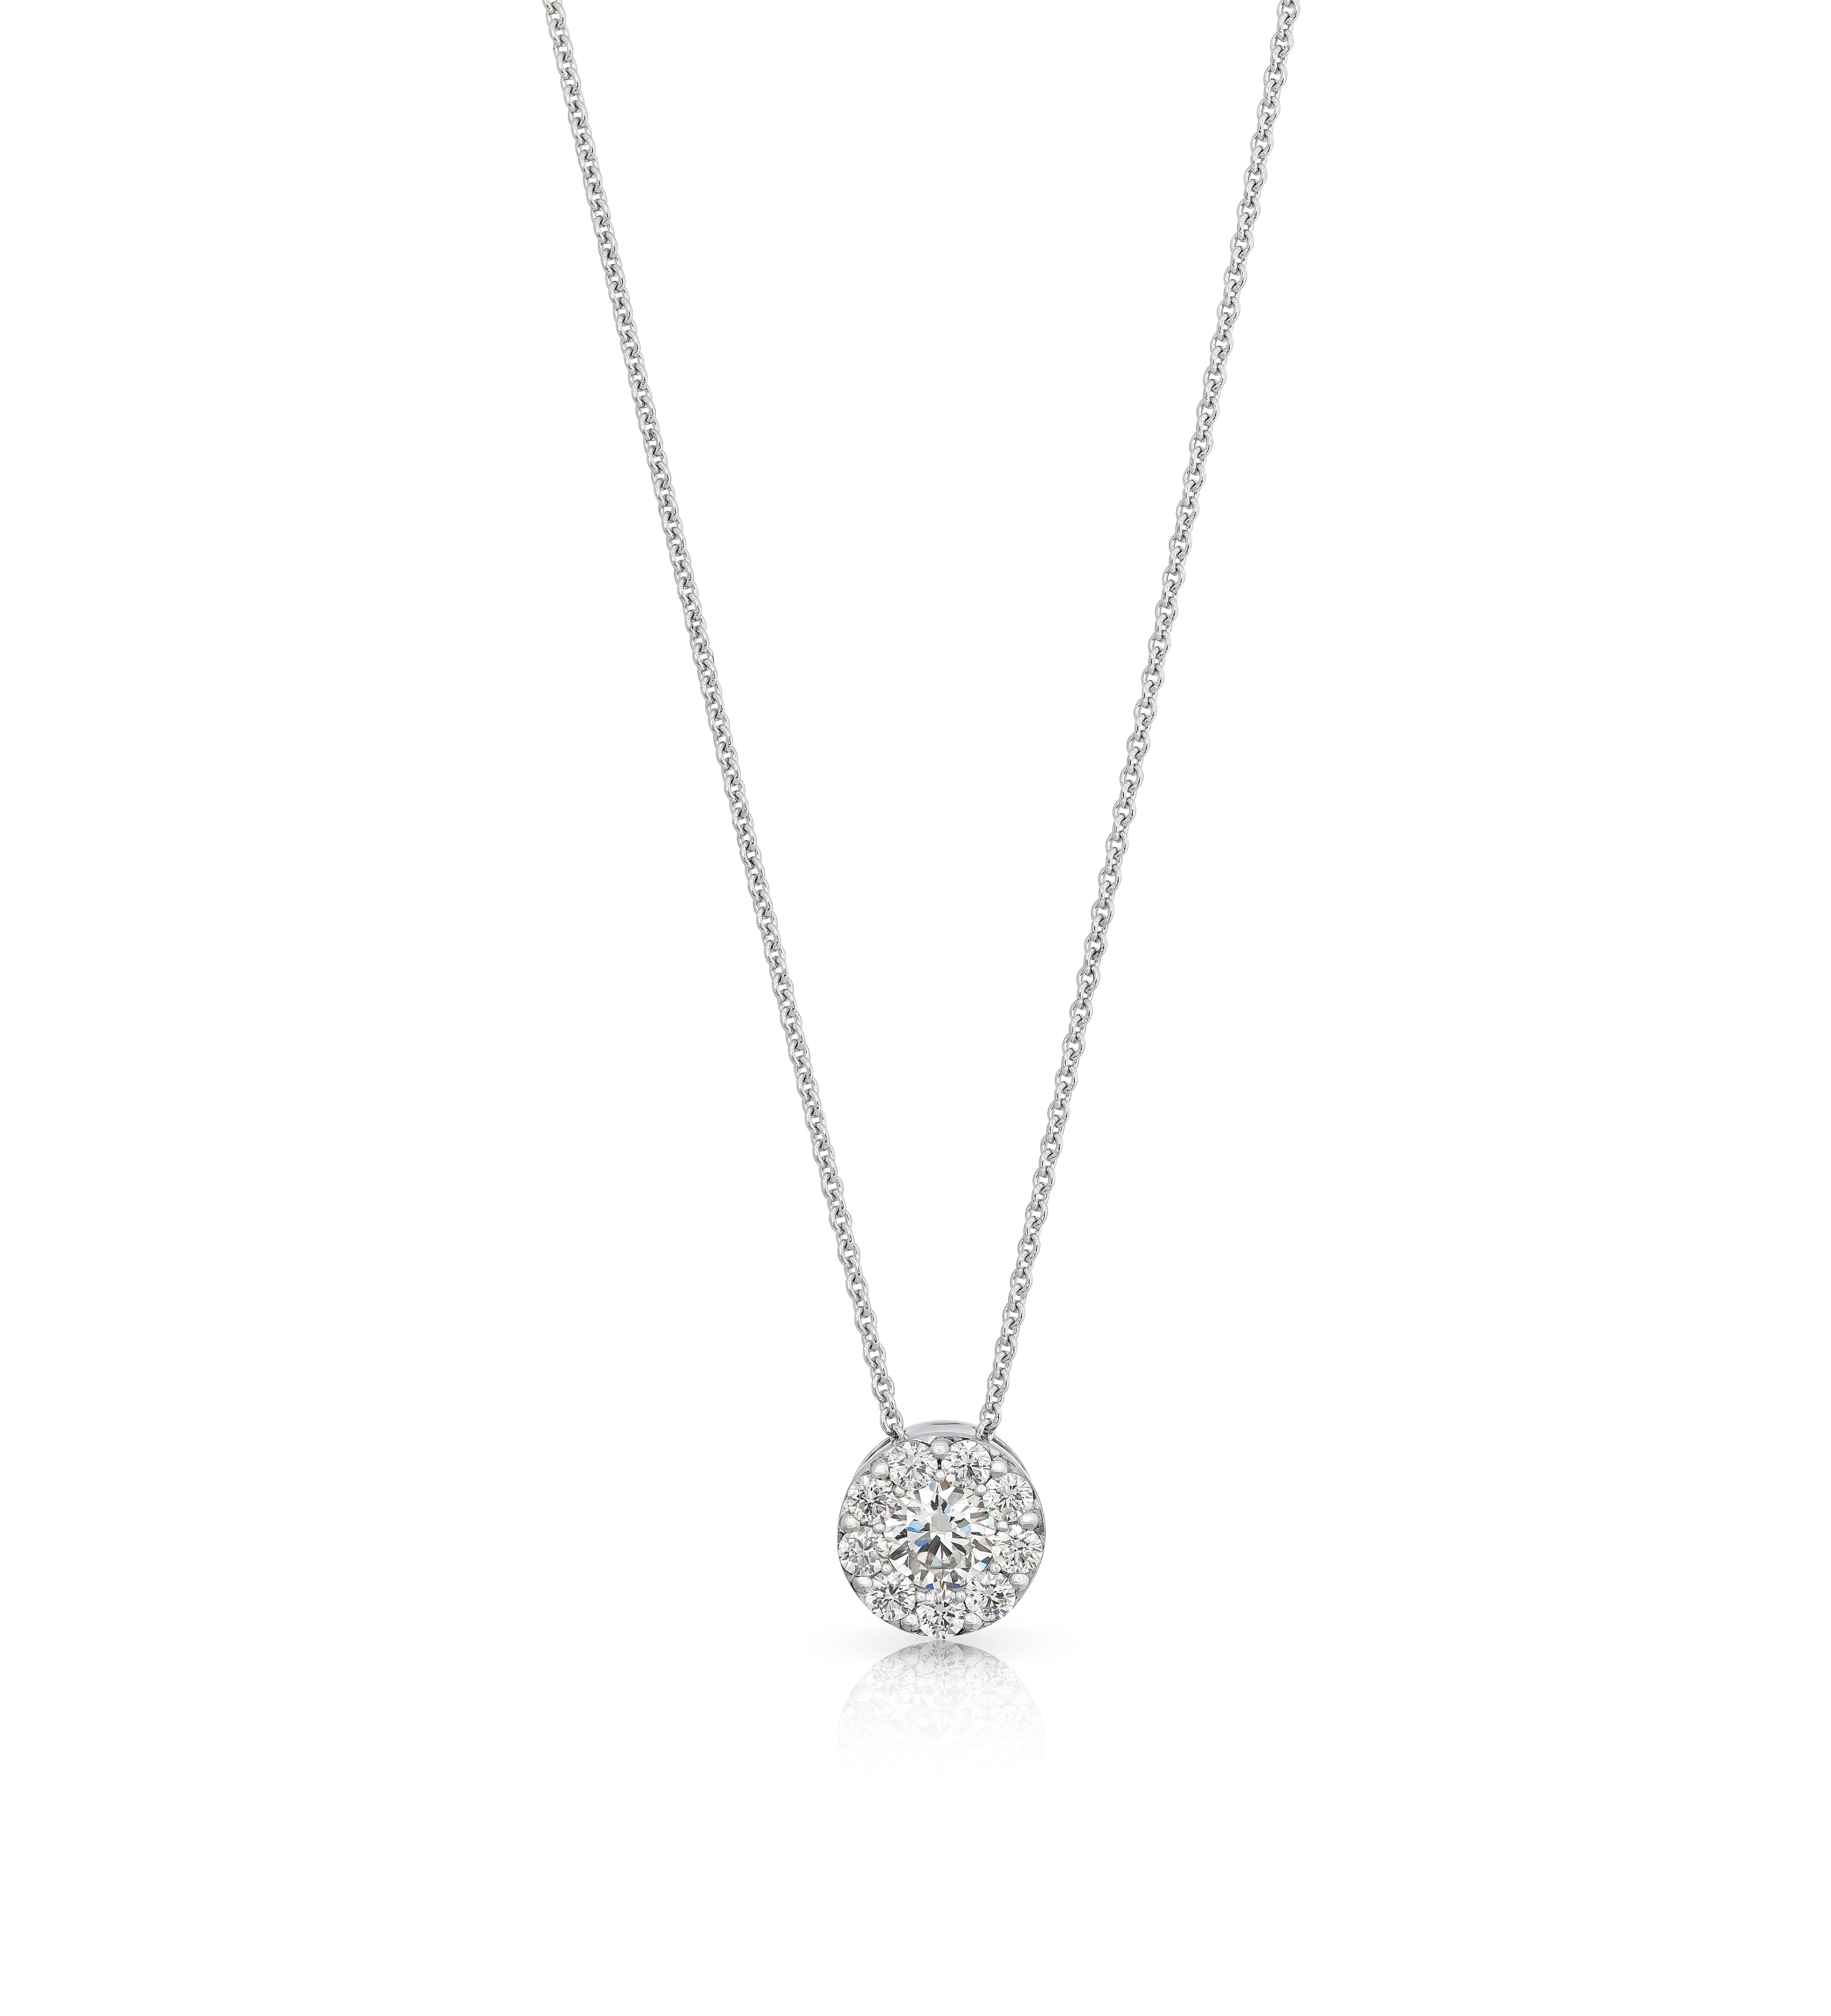 Marquise Halo Diamond Necklace - Smith and Bevill Jewelers